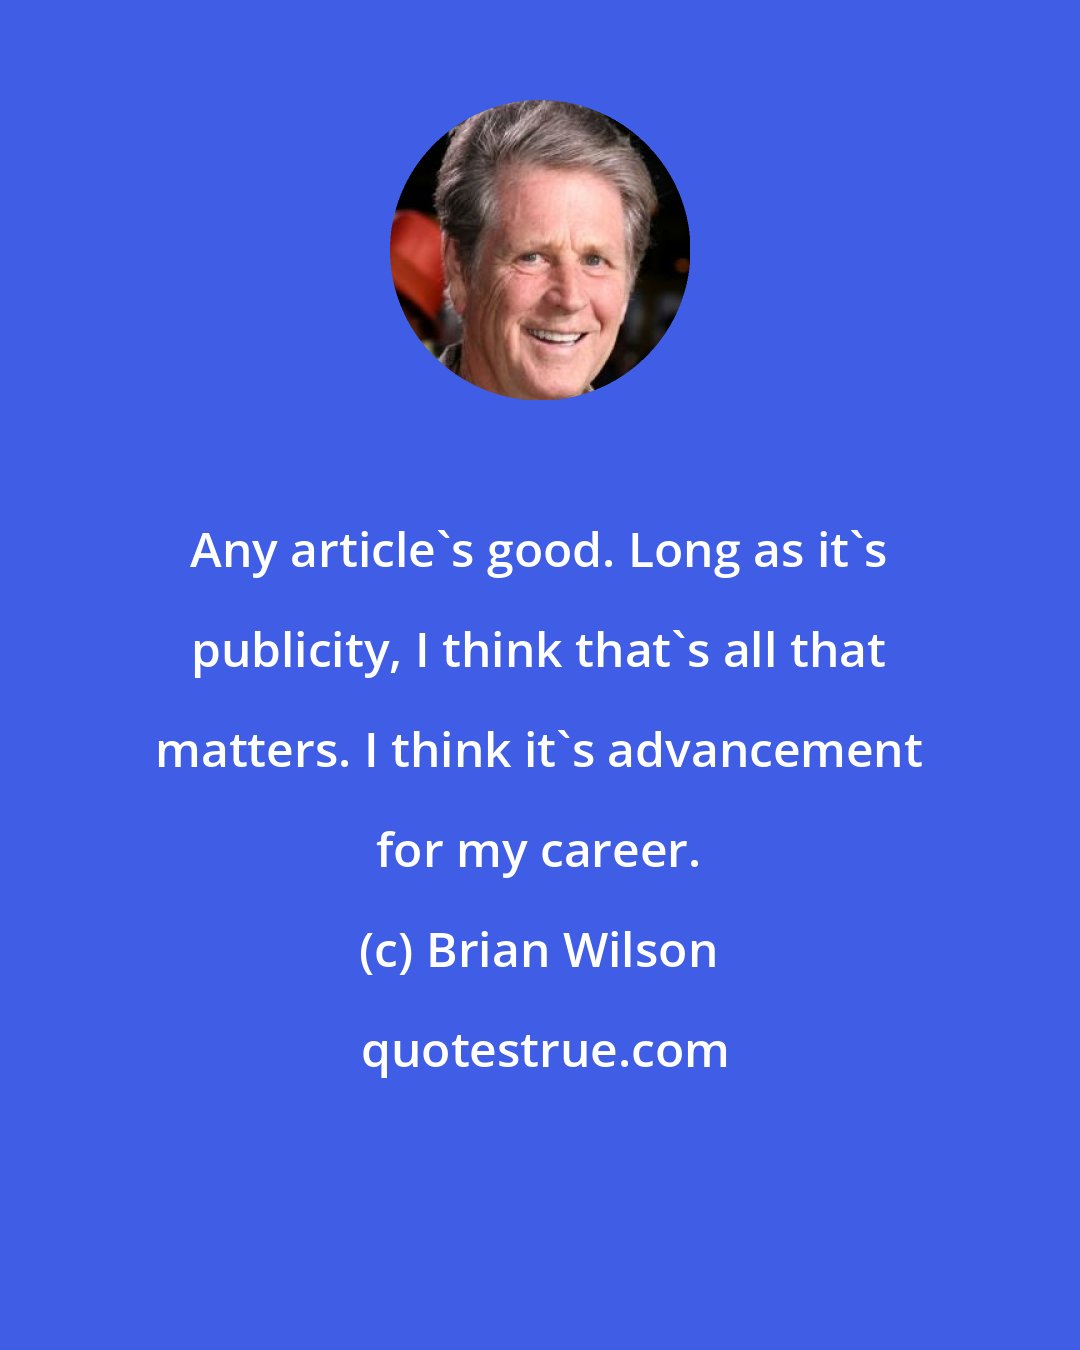 Brian Wilson: Any article's good. Long as it's publicity, I think that's all that matters. I think it's advancement for my career.